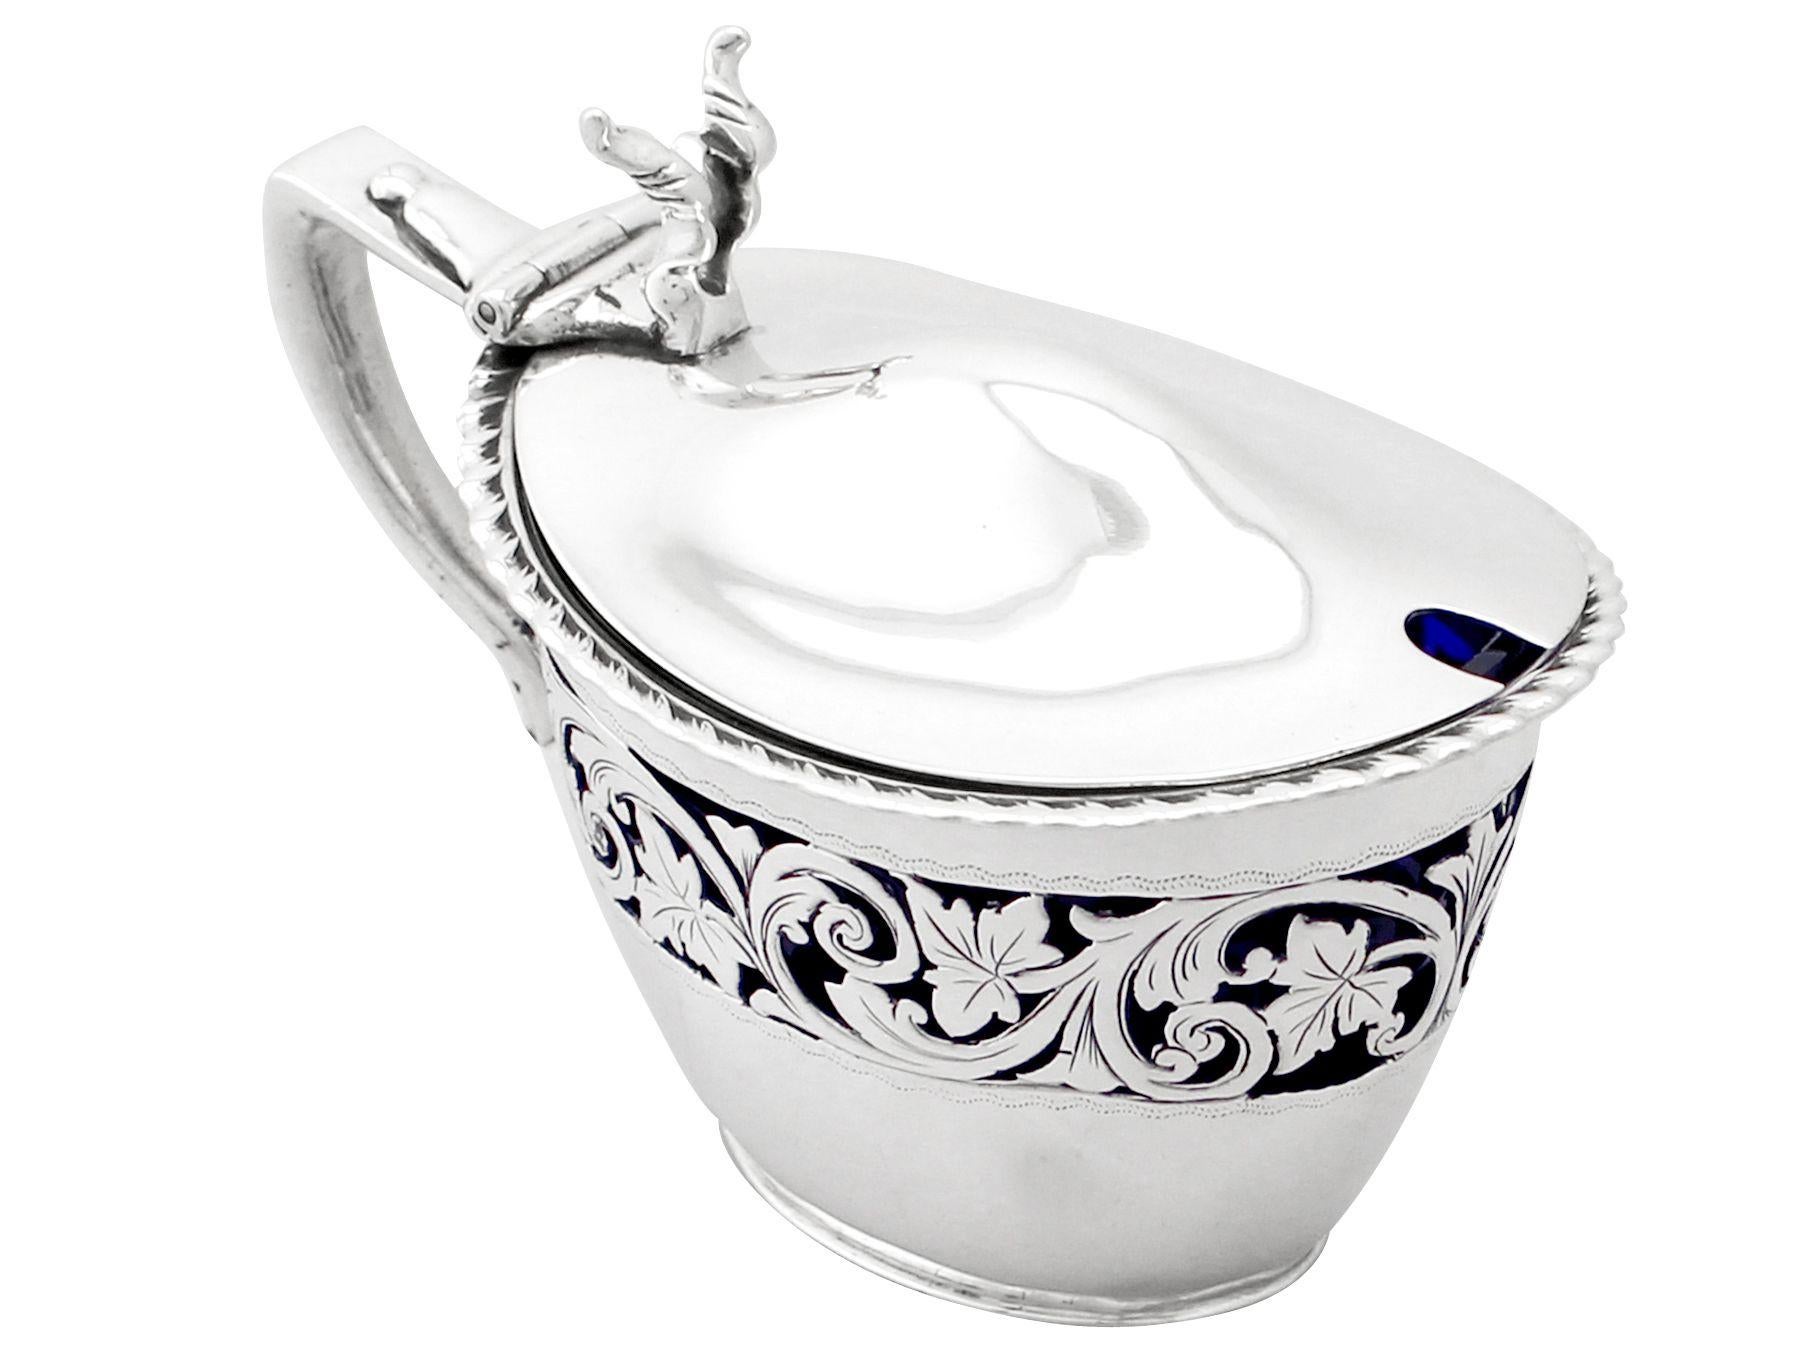 A fine and impressive antique Victorian English sterling silver mustard pot; an addition to our silver cruets/condiments collection.

This exceptional antique Victorian sterling silver mustard pot has an oval tapering form.

The body of the